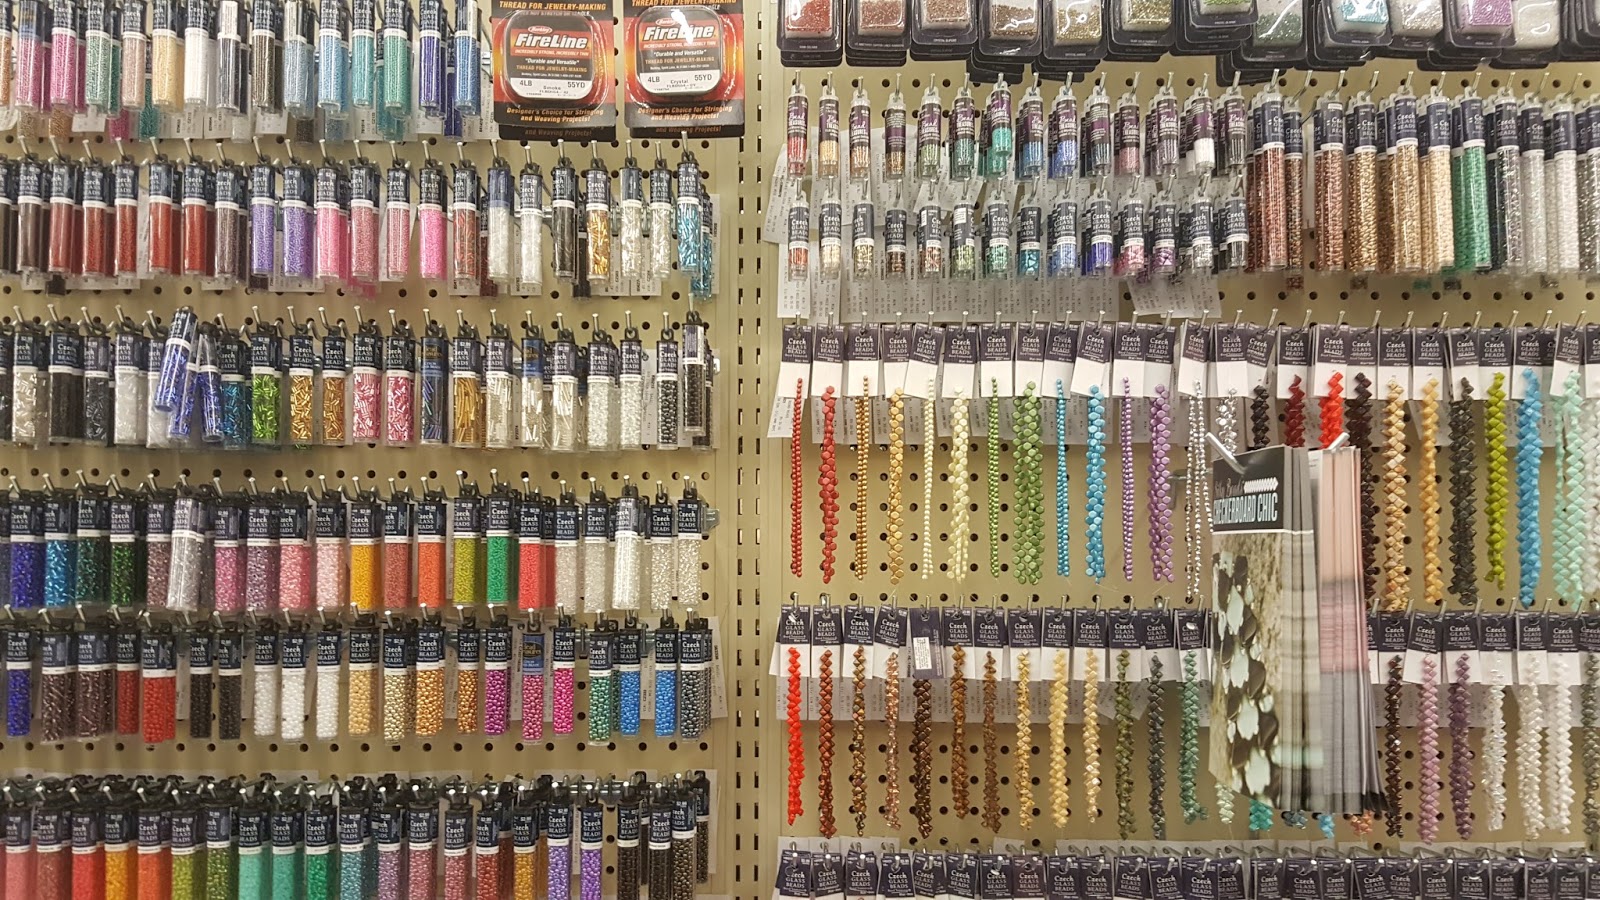 *ClayGuana: Hobby Lobby and Michaels in Plano, TX - Loooots of pictures